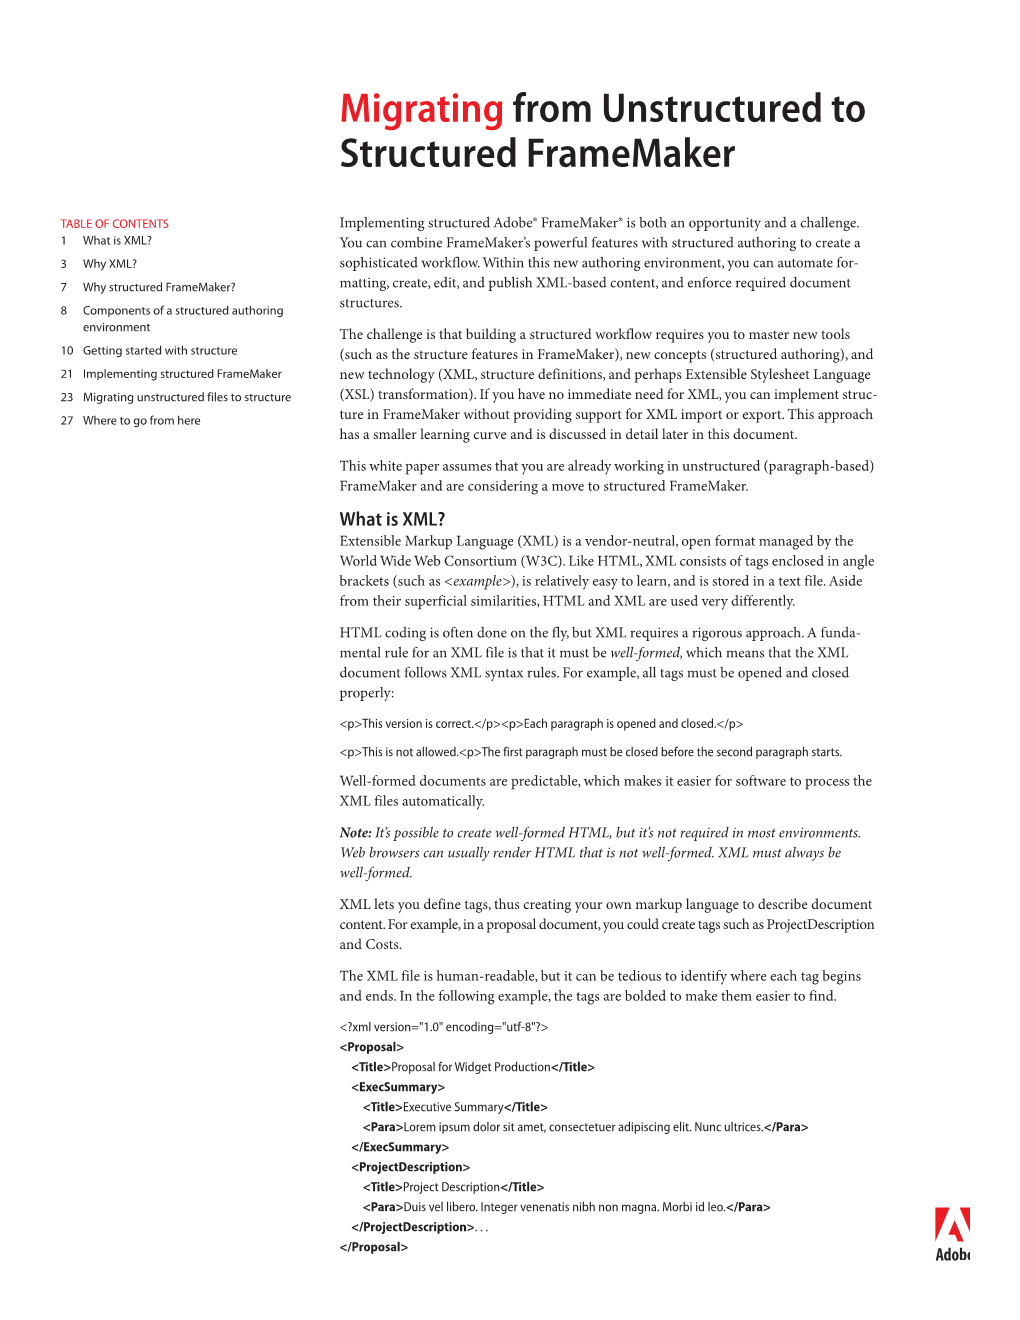 Migrating from Unstructured to Structured Framemaker